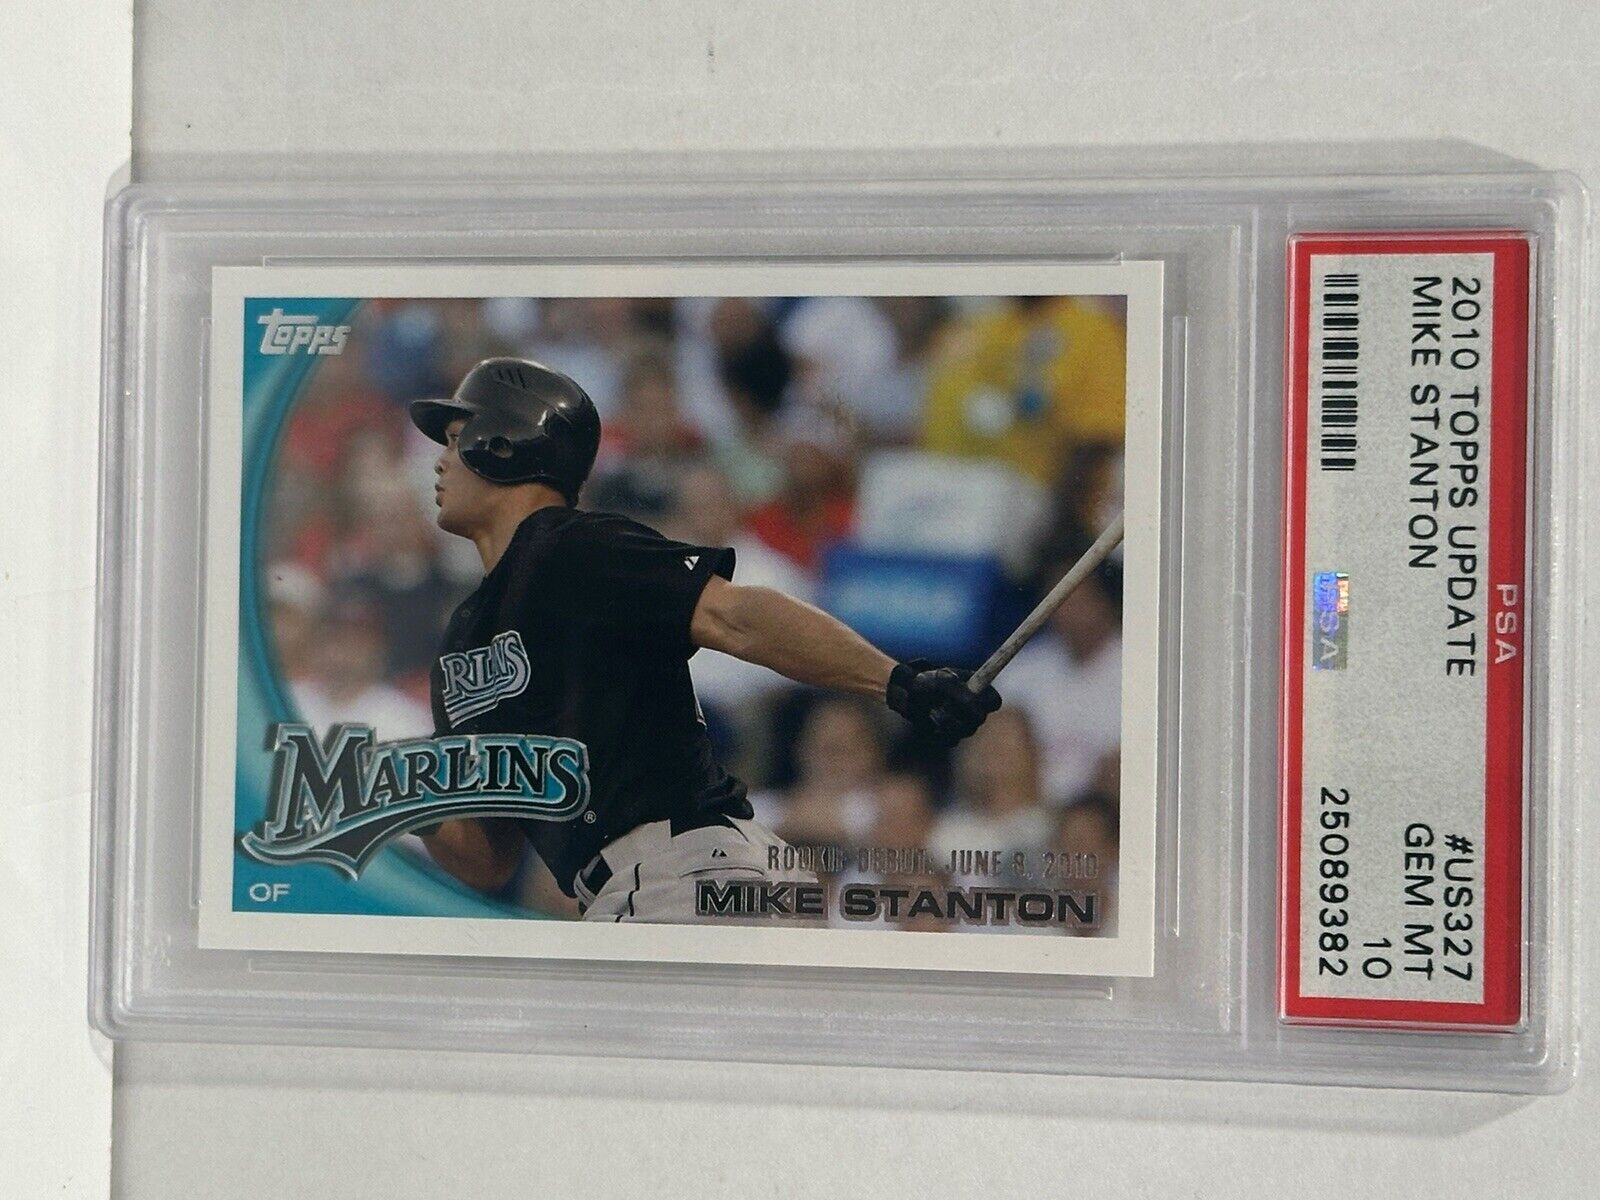 PSA 10 2010 Topps Update Rookie Debut Mike (Giancarlo) Stanton #US-327 Gem Mint